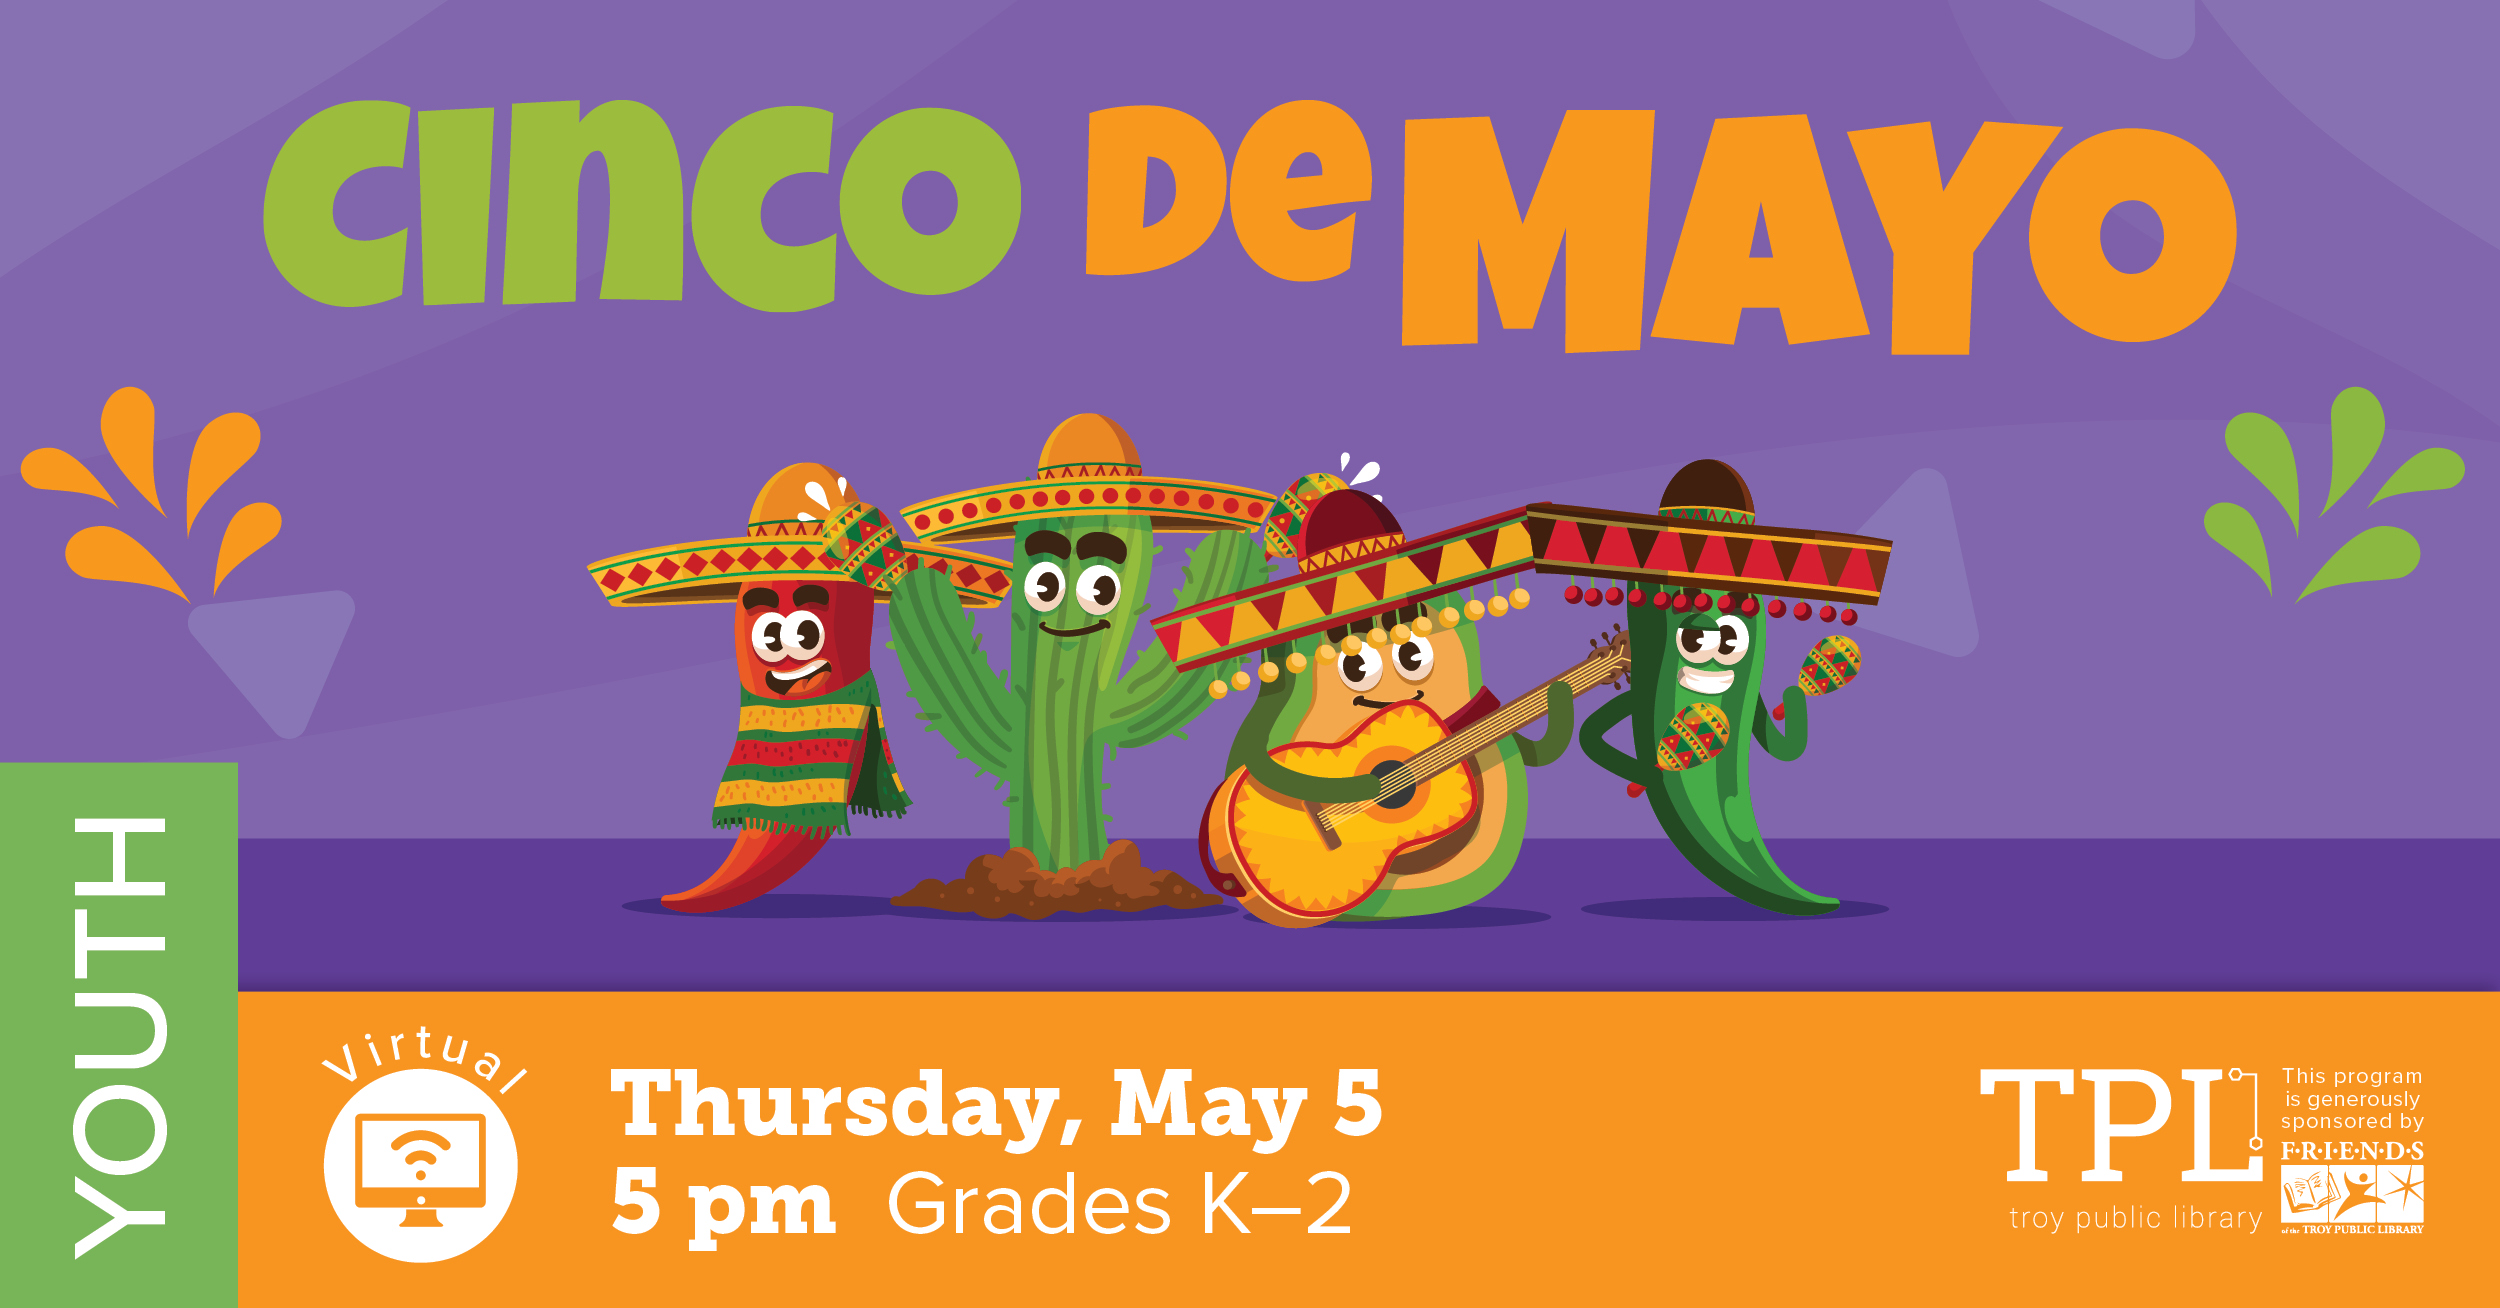 Cinco De Mayo Virtual Program Thursday, May 5 at 5pm grades kindergarten to 2. Sponsored by the Friends of the Troy Public Library